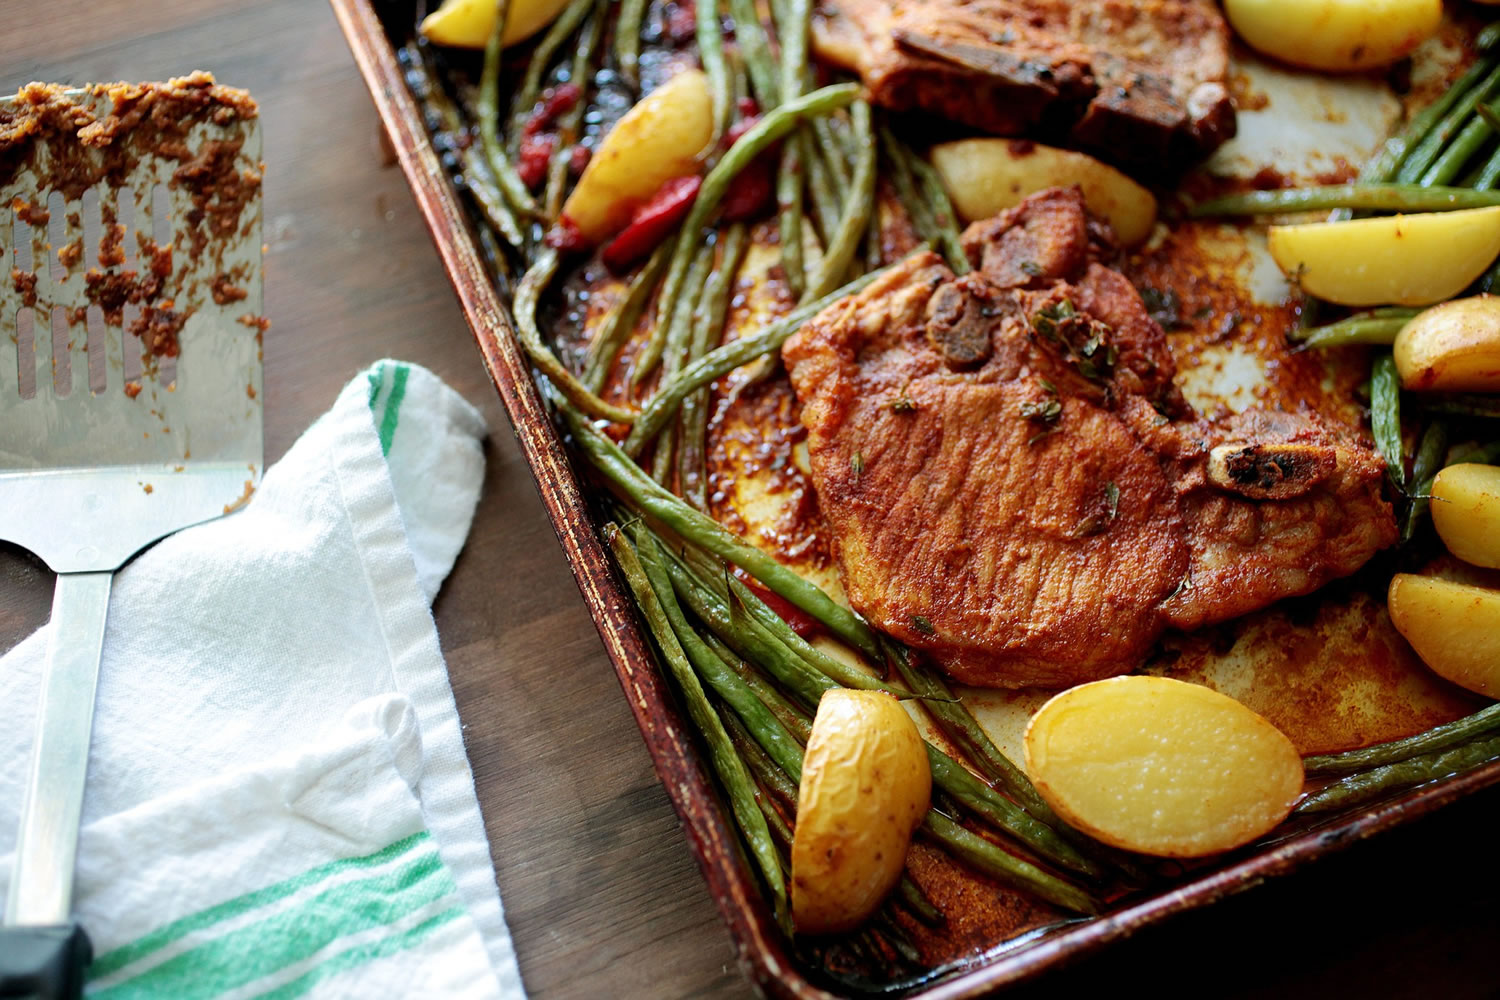 The Roasted Pork Chops with Green Beans and Potatoes takes 25 minutes to cook.